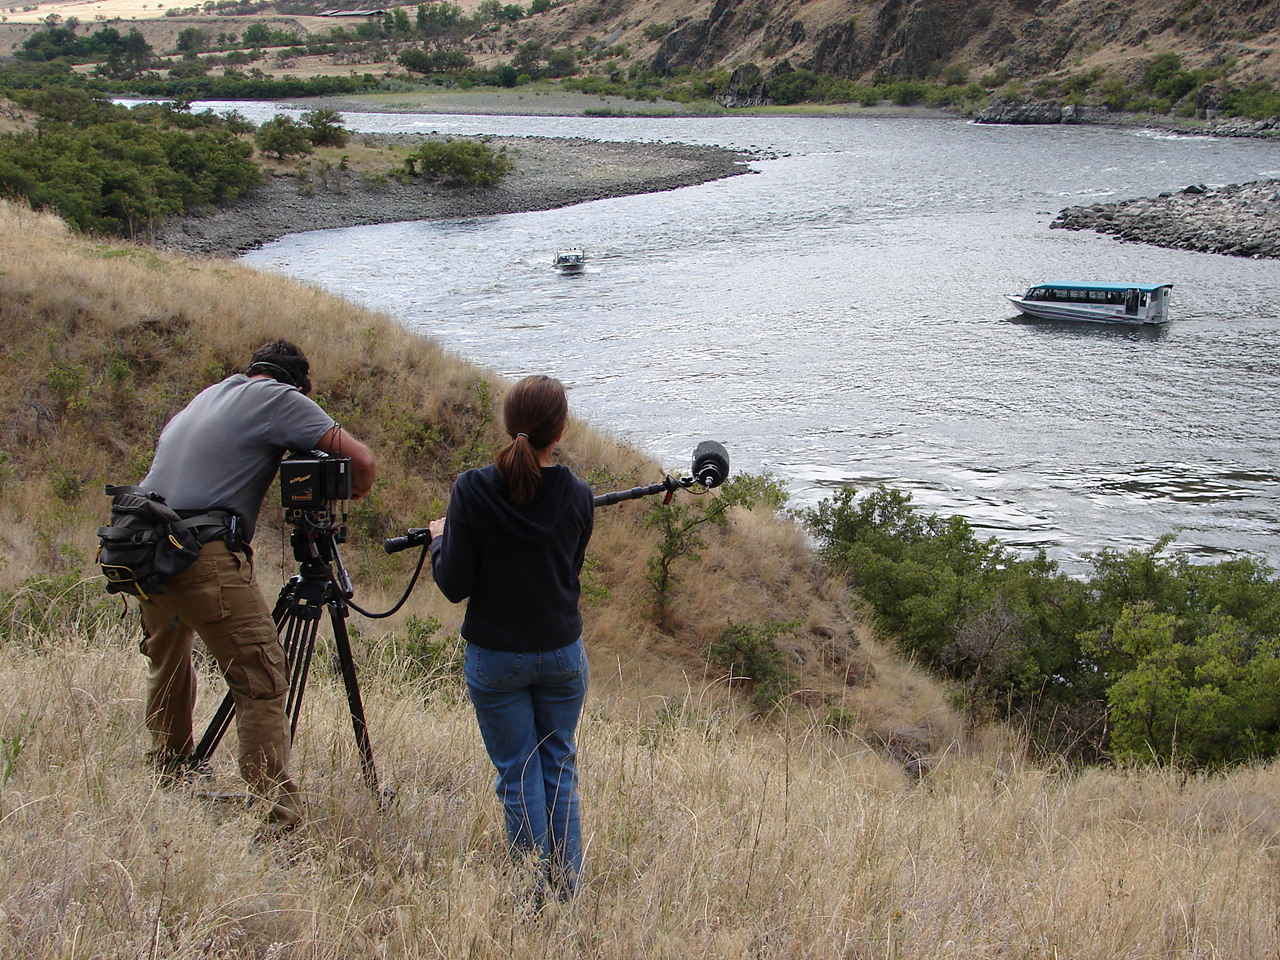 Man and women commercial filming a jetboat on the Snake River